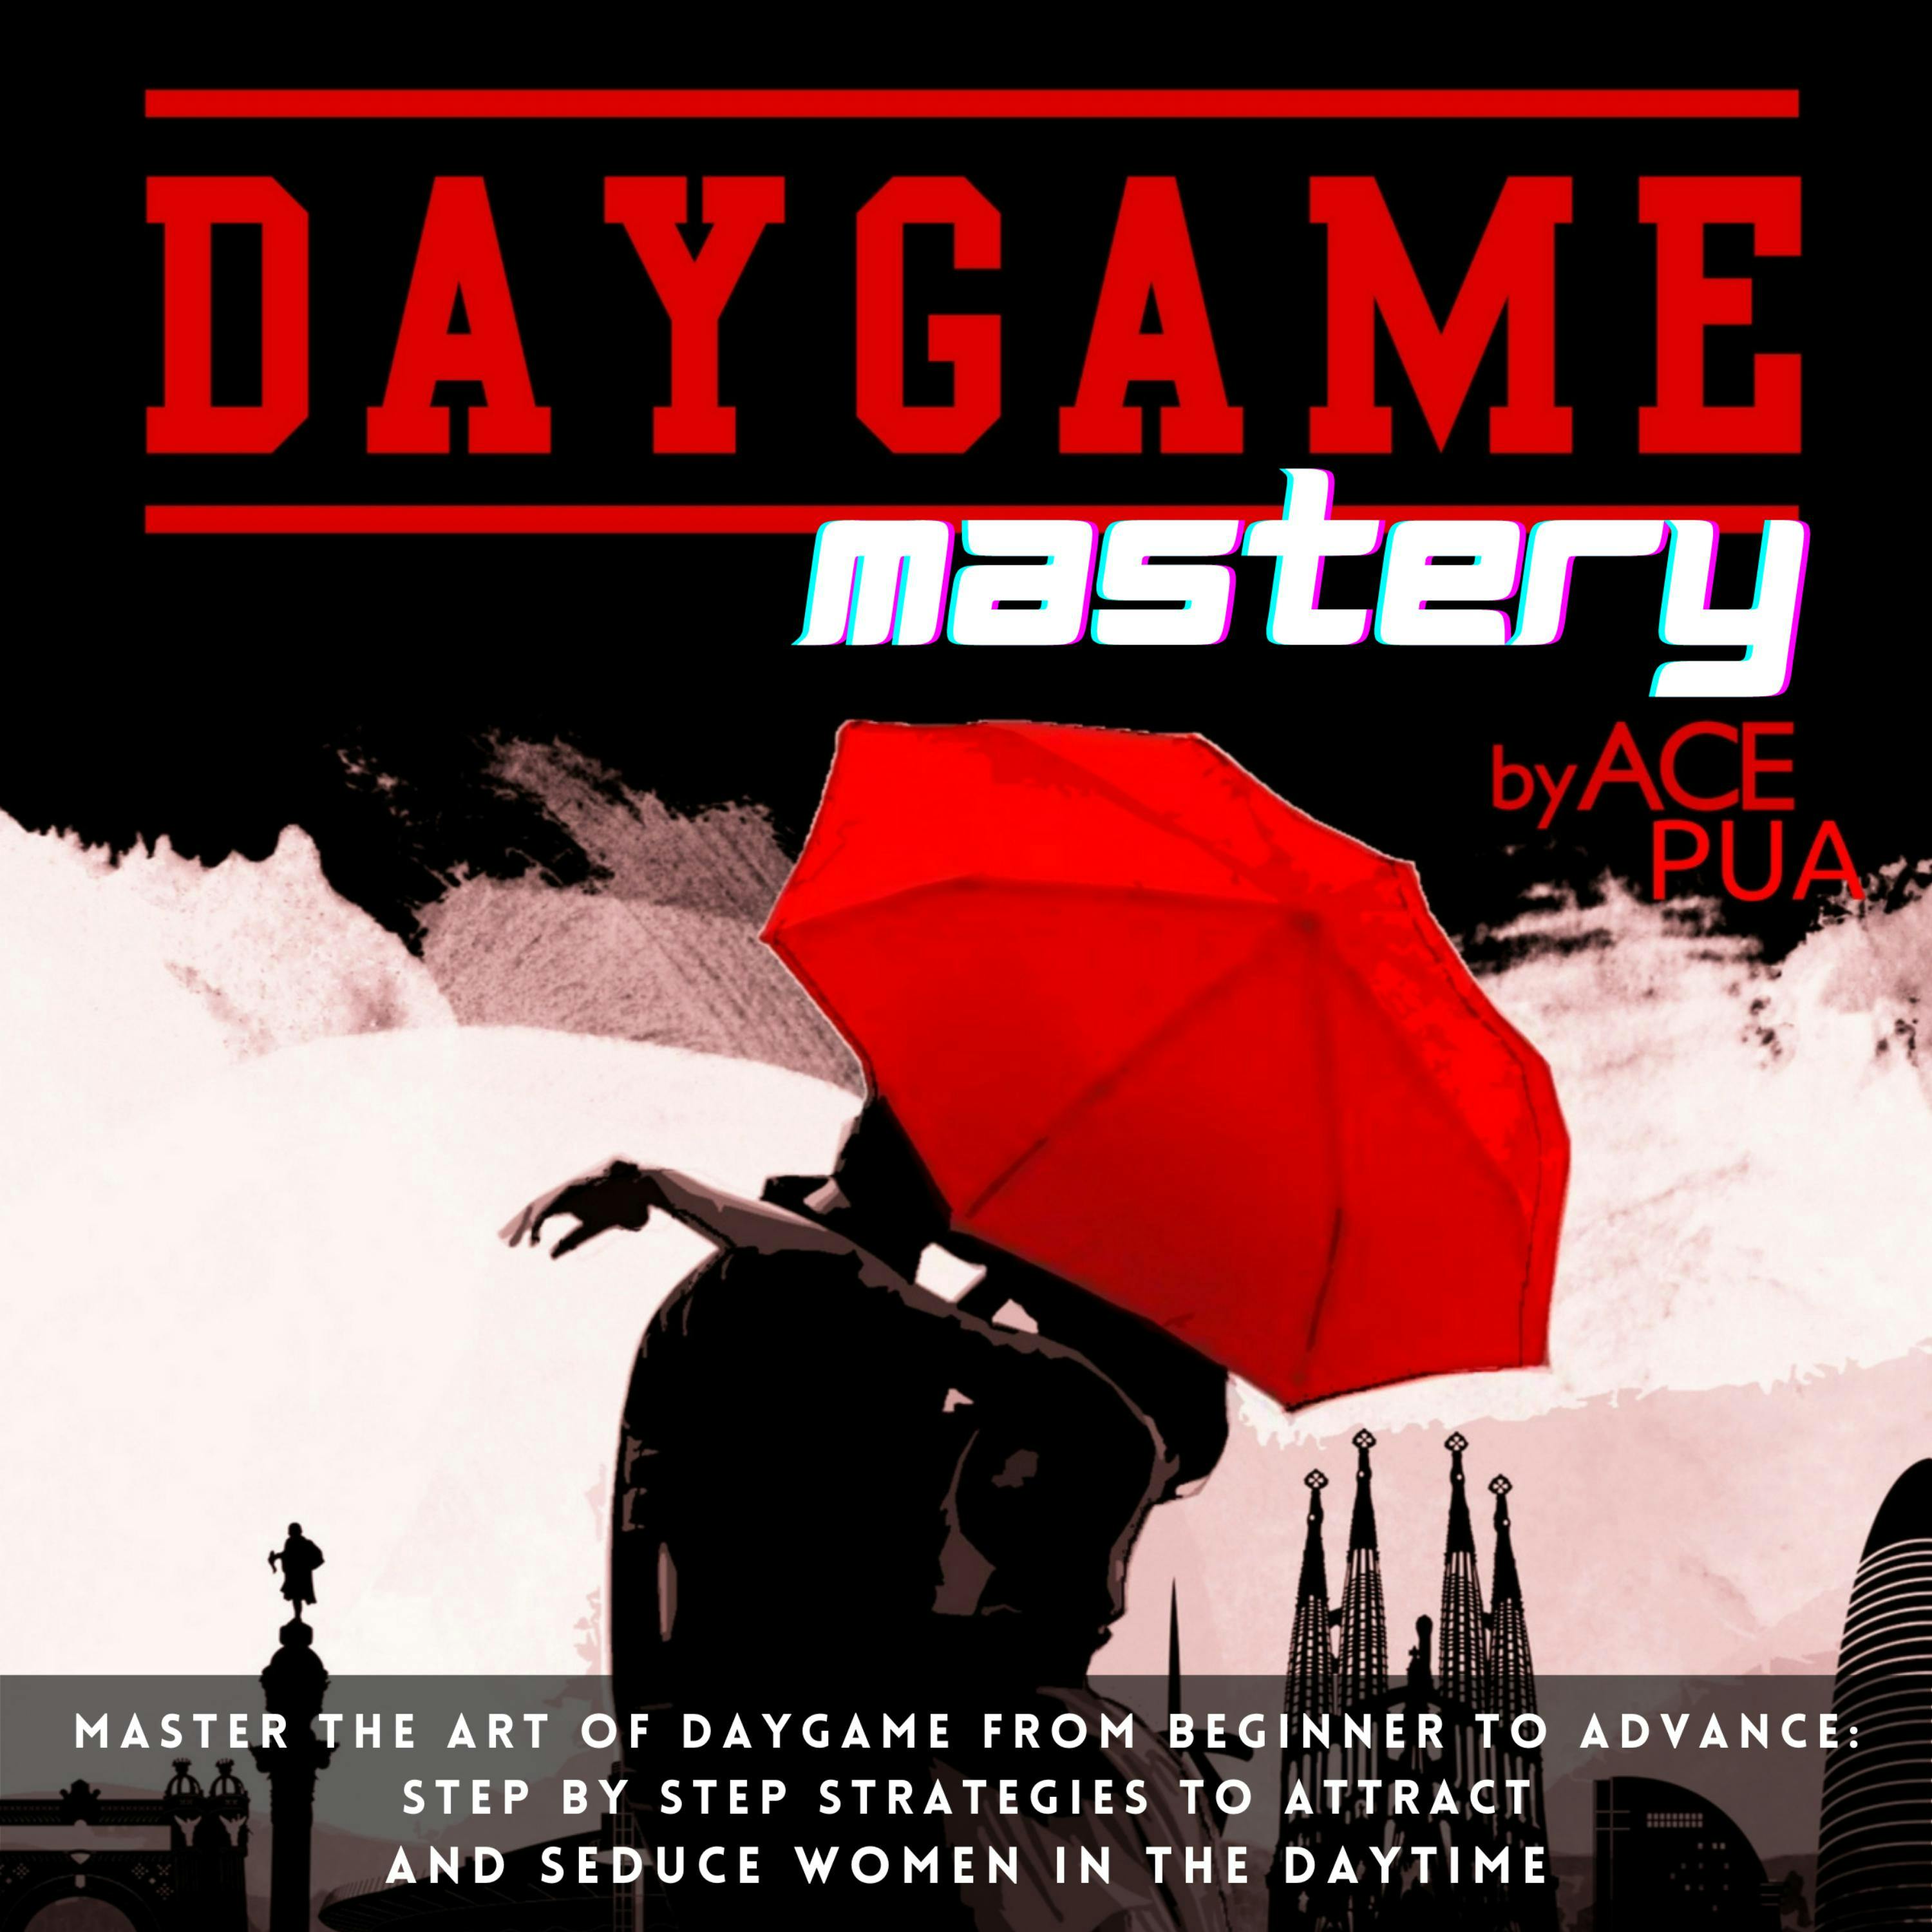 Daygame Mastery: Master the Art of Daygame from Beginner to Advance: Step by step Strategies to attract and seduce women in the daytime - Ace Pua